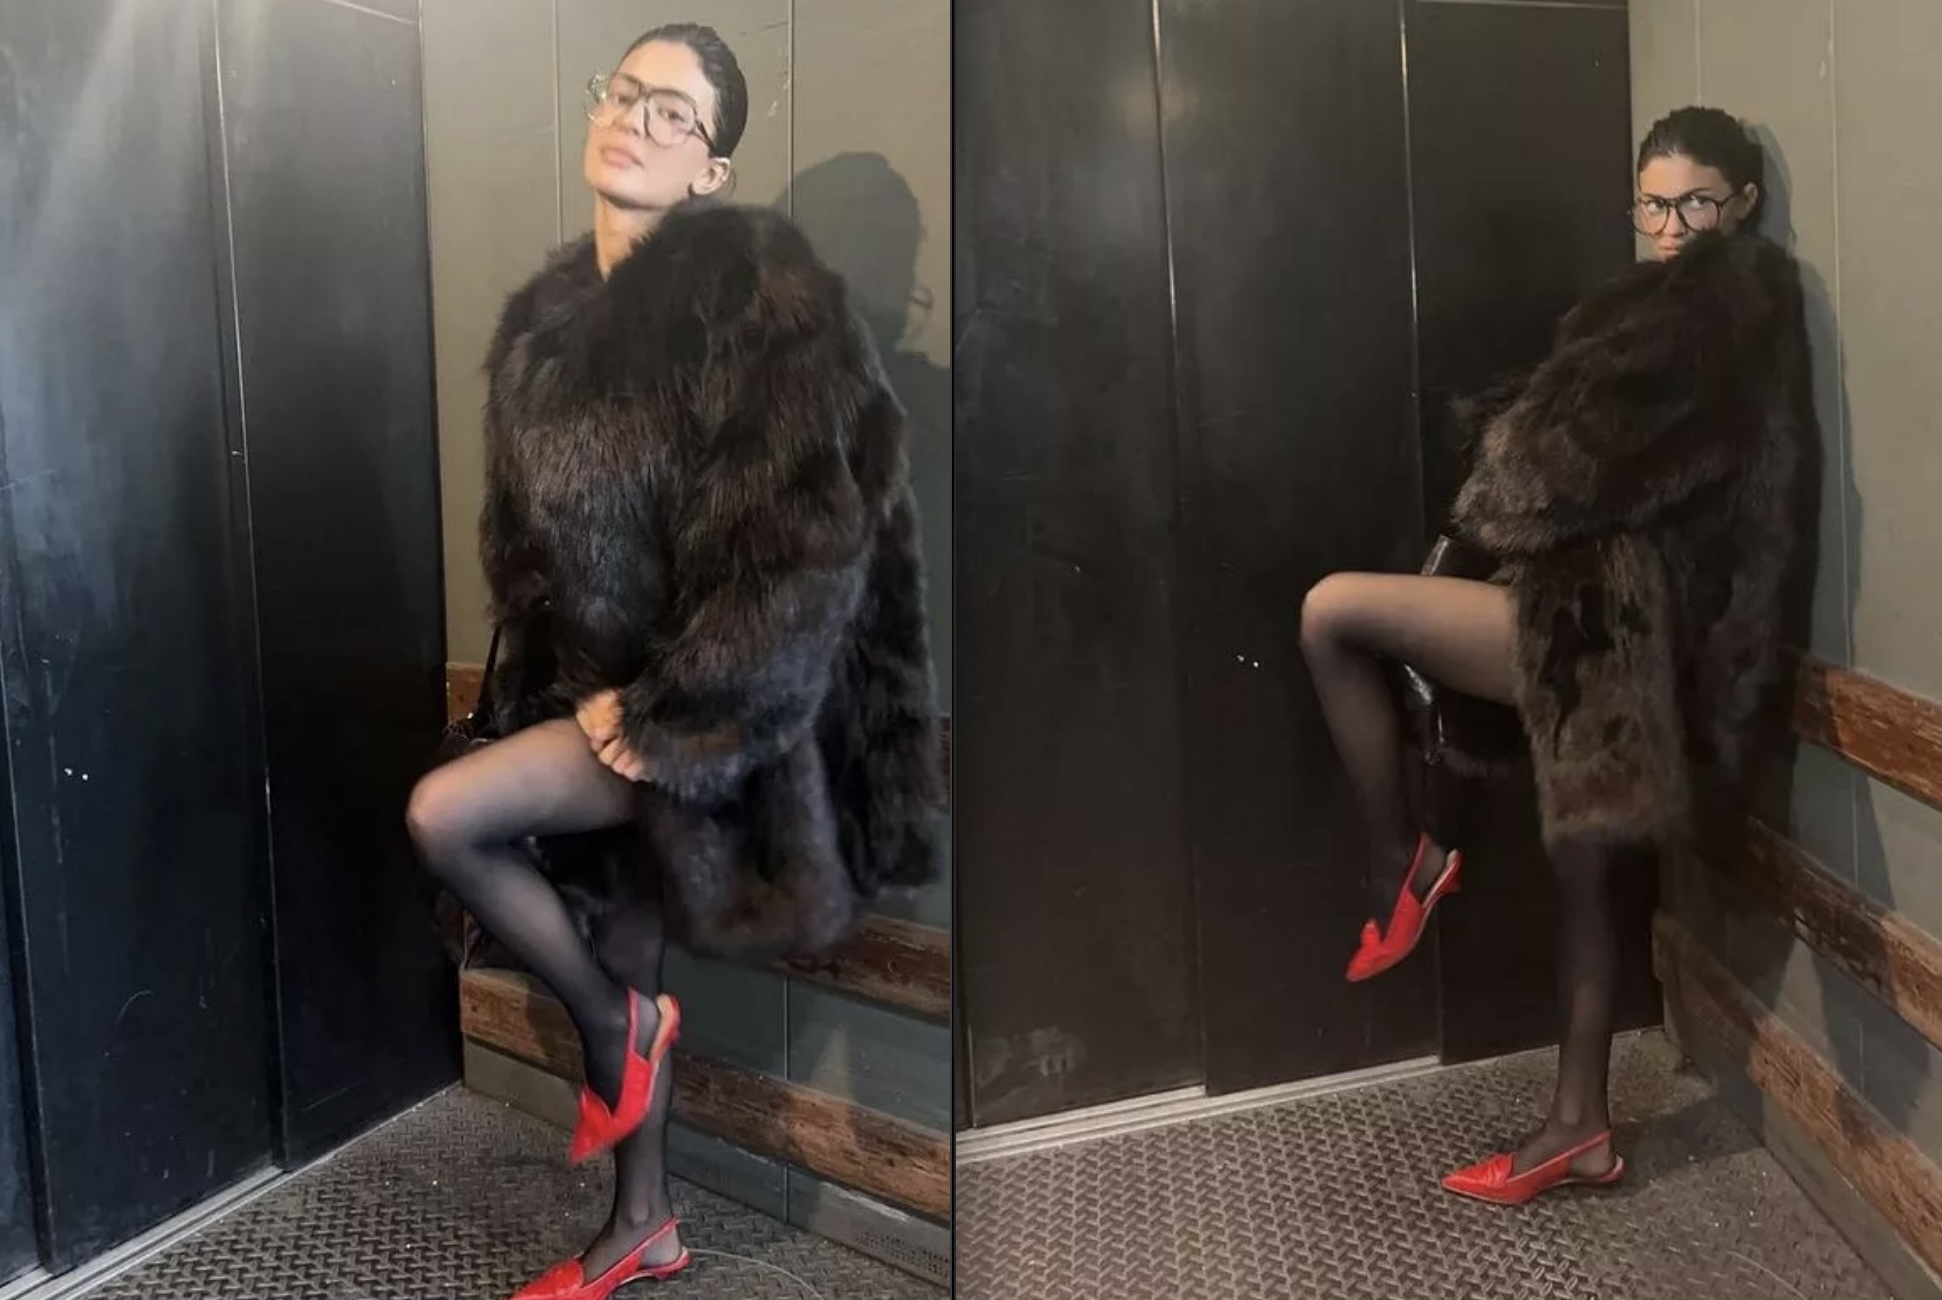 Kylie Jenner's Fans Spot 'Unsanitary' Detail as She Goes Pantless in Fur Coat